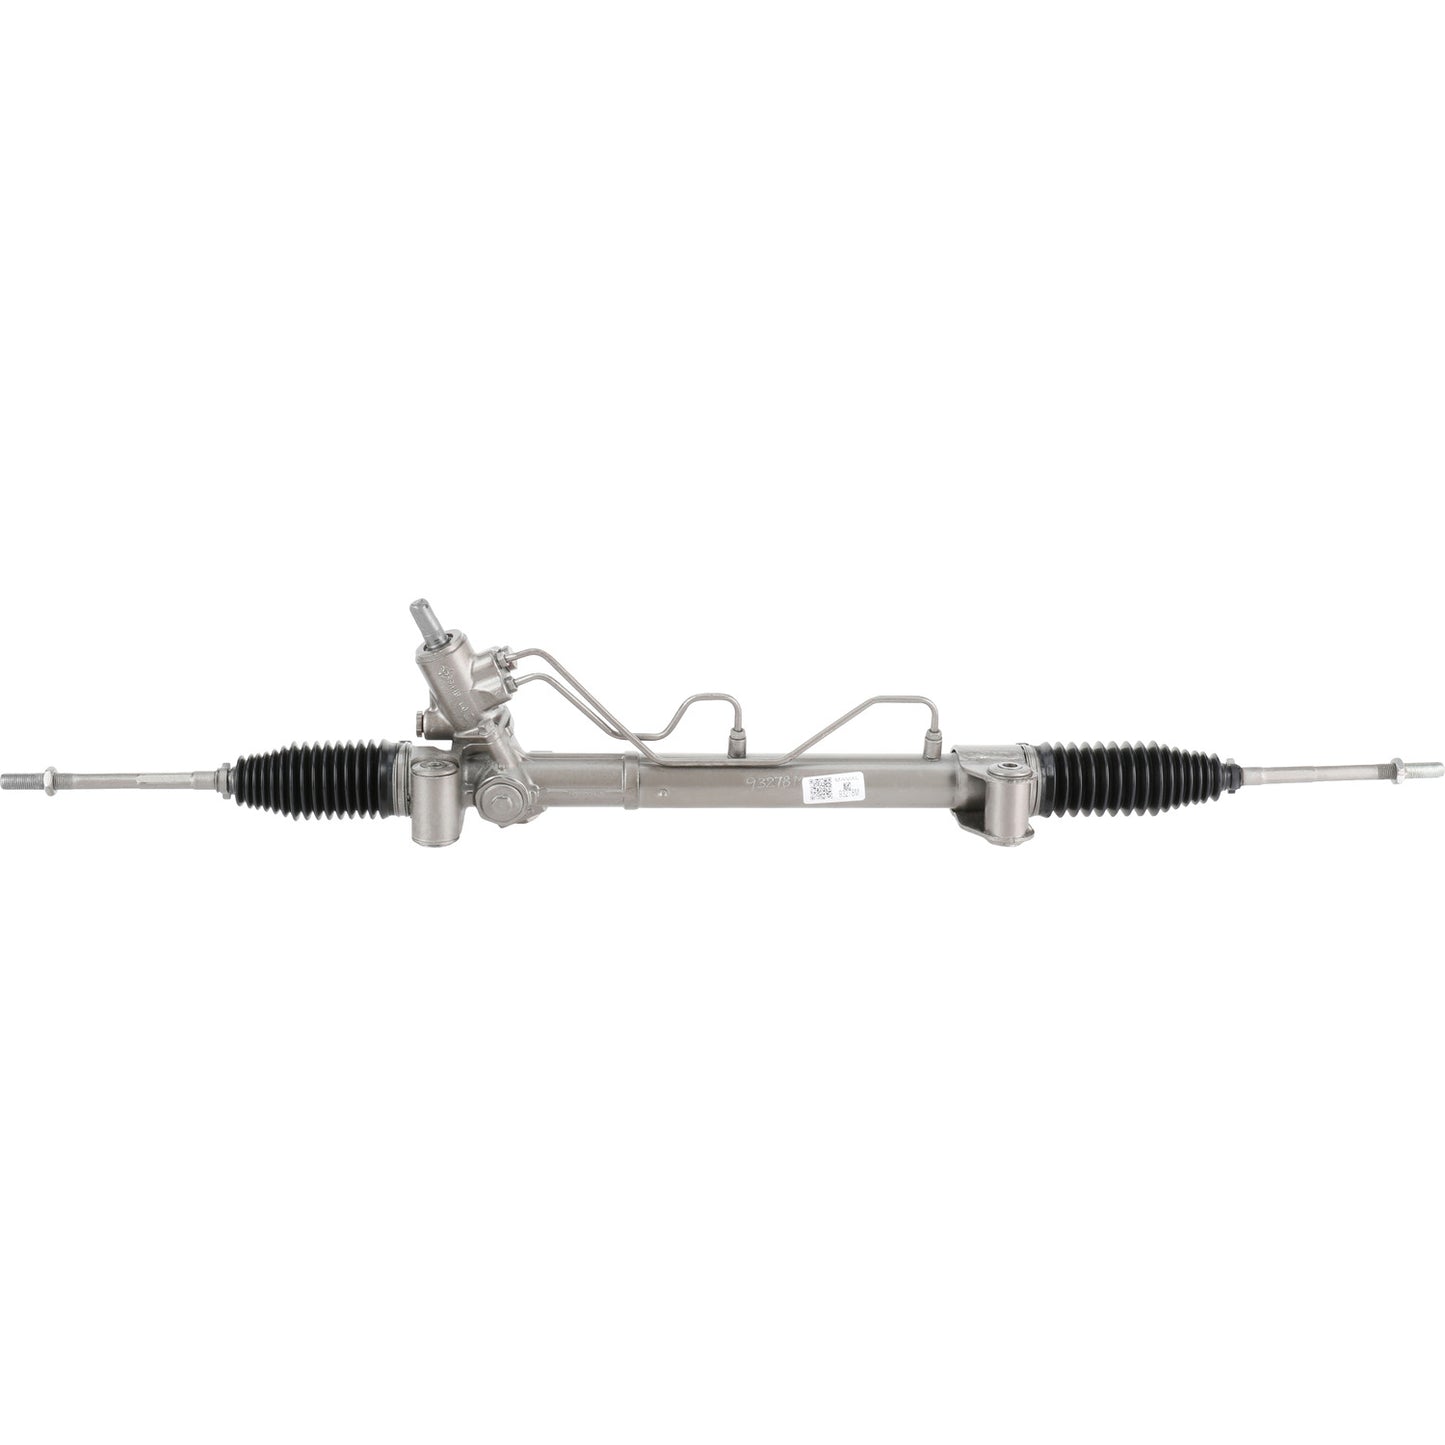 Rack and Pinion Assembly - MAVAL - Hydraulic Power - Remanufactured - 93278M